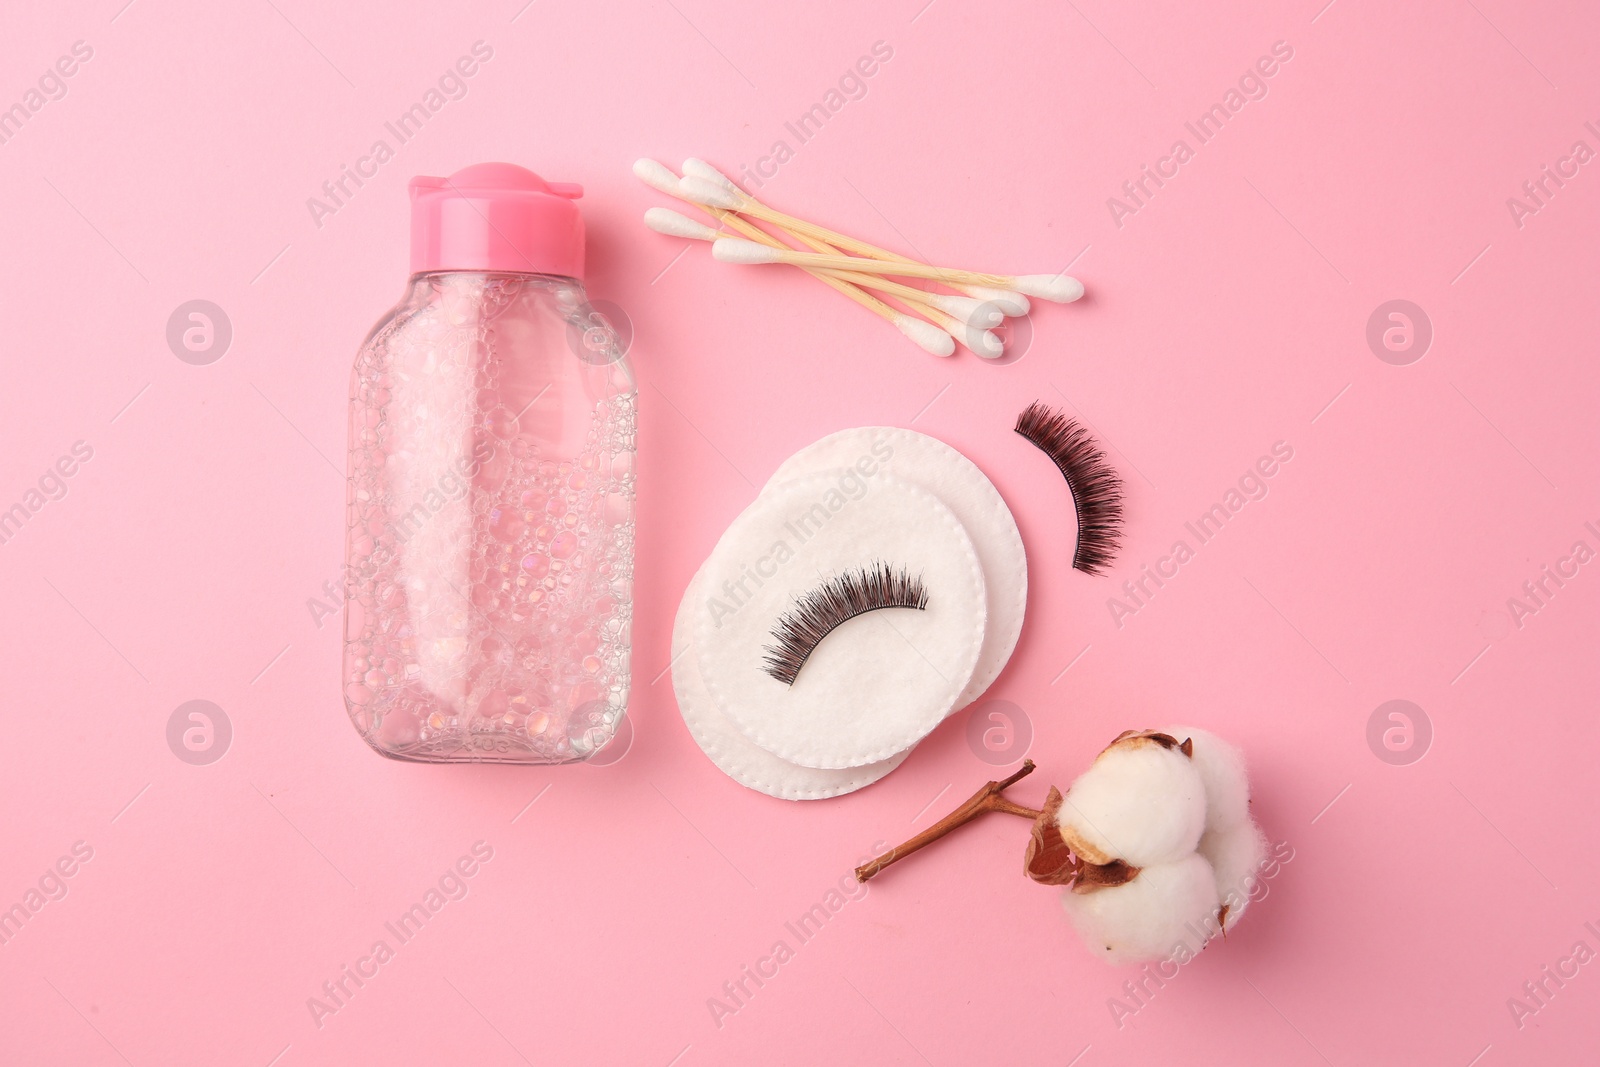 Photo of Bottle of makeup remover, cotton flower, pads, swabs and false eyelashes on pink background, flat lay